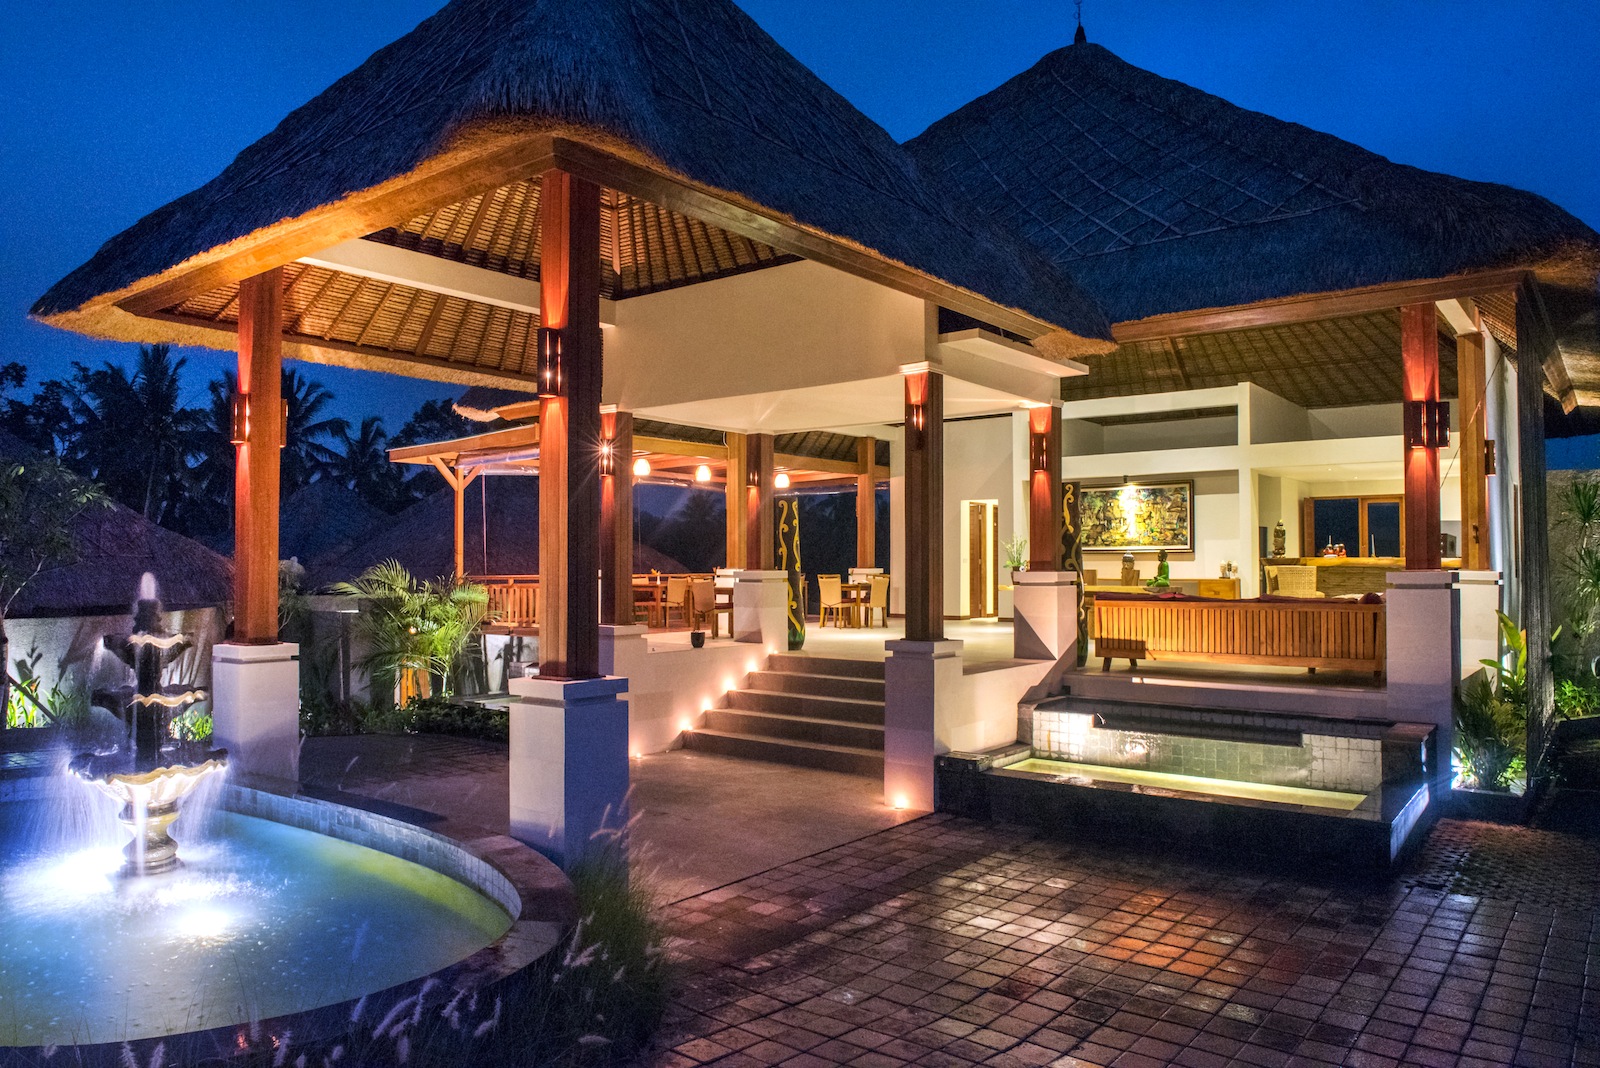 Anusara Luxury Villas - Absolute Bliss and Tranquility